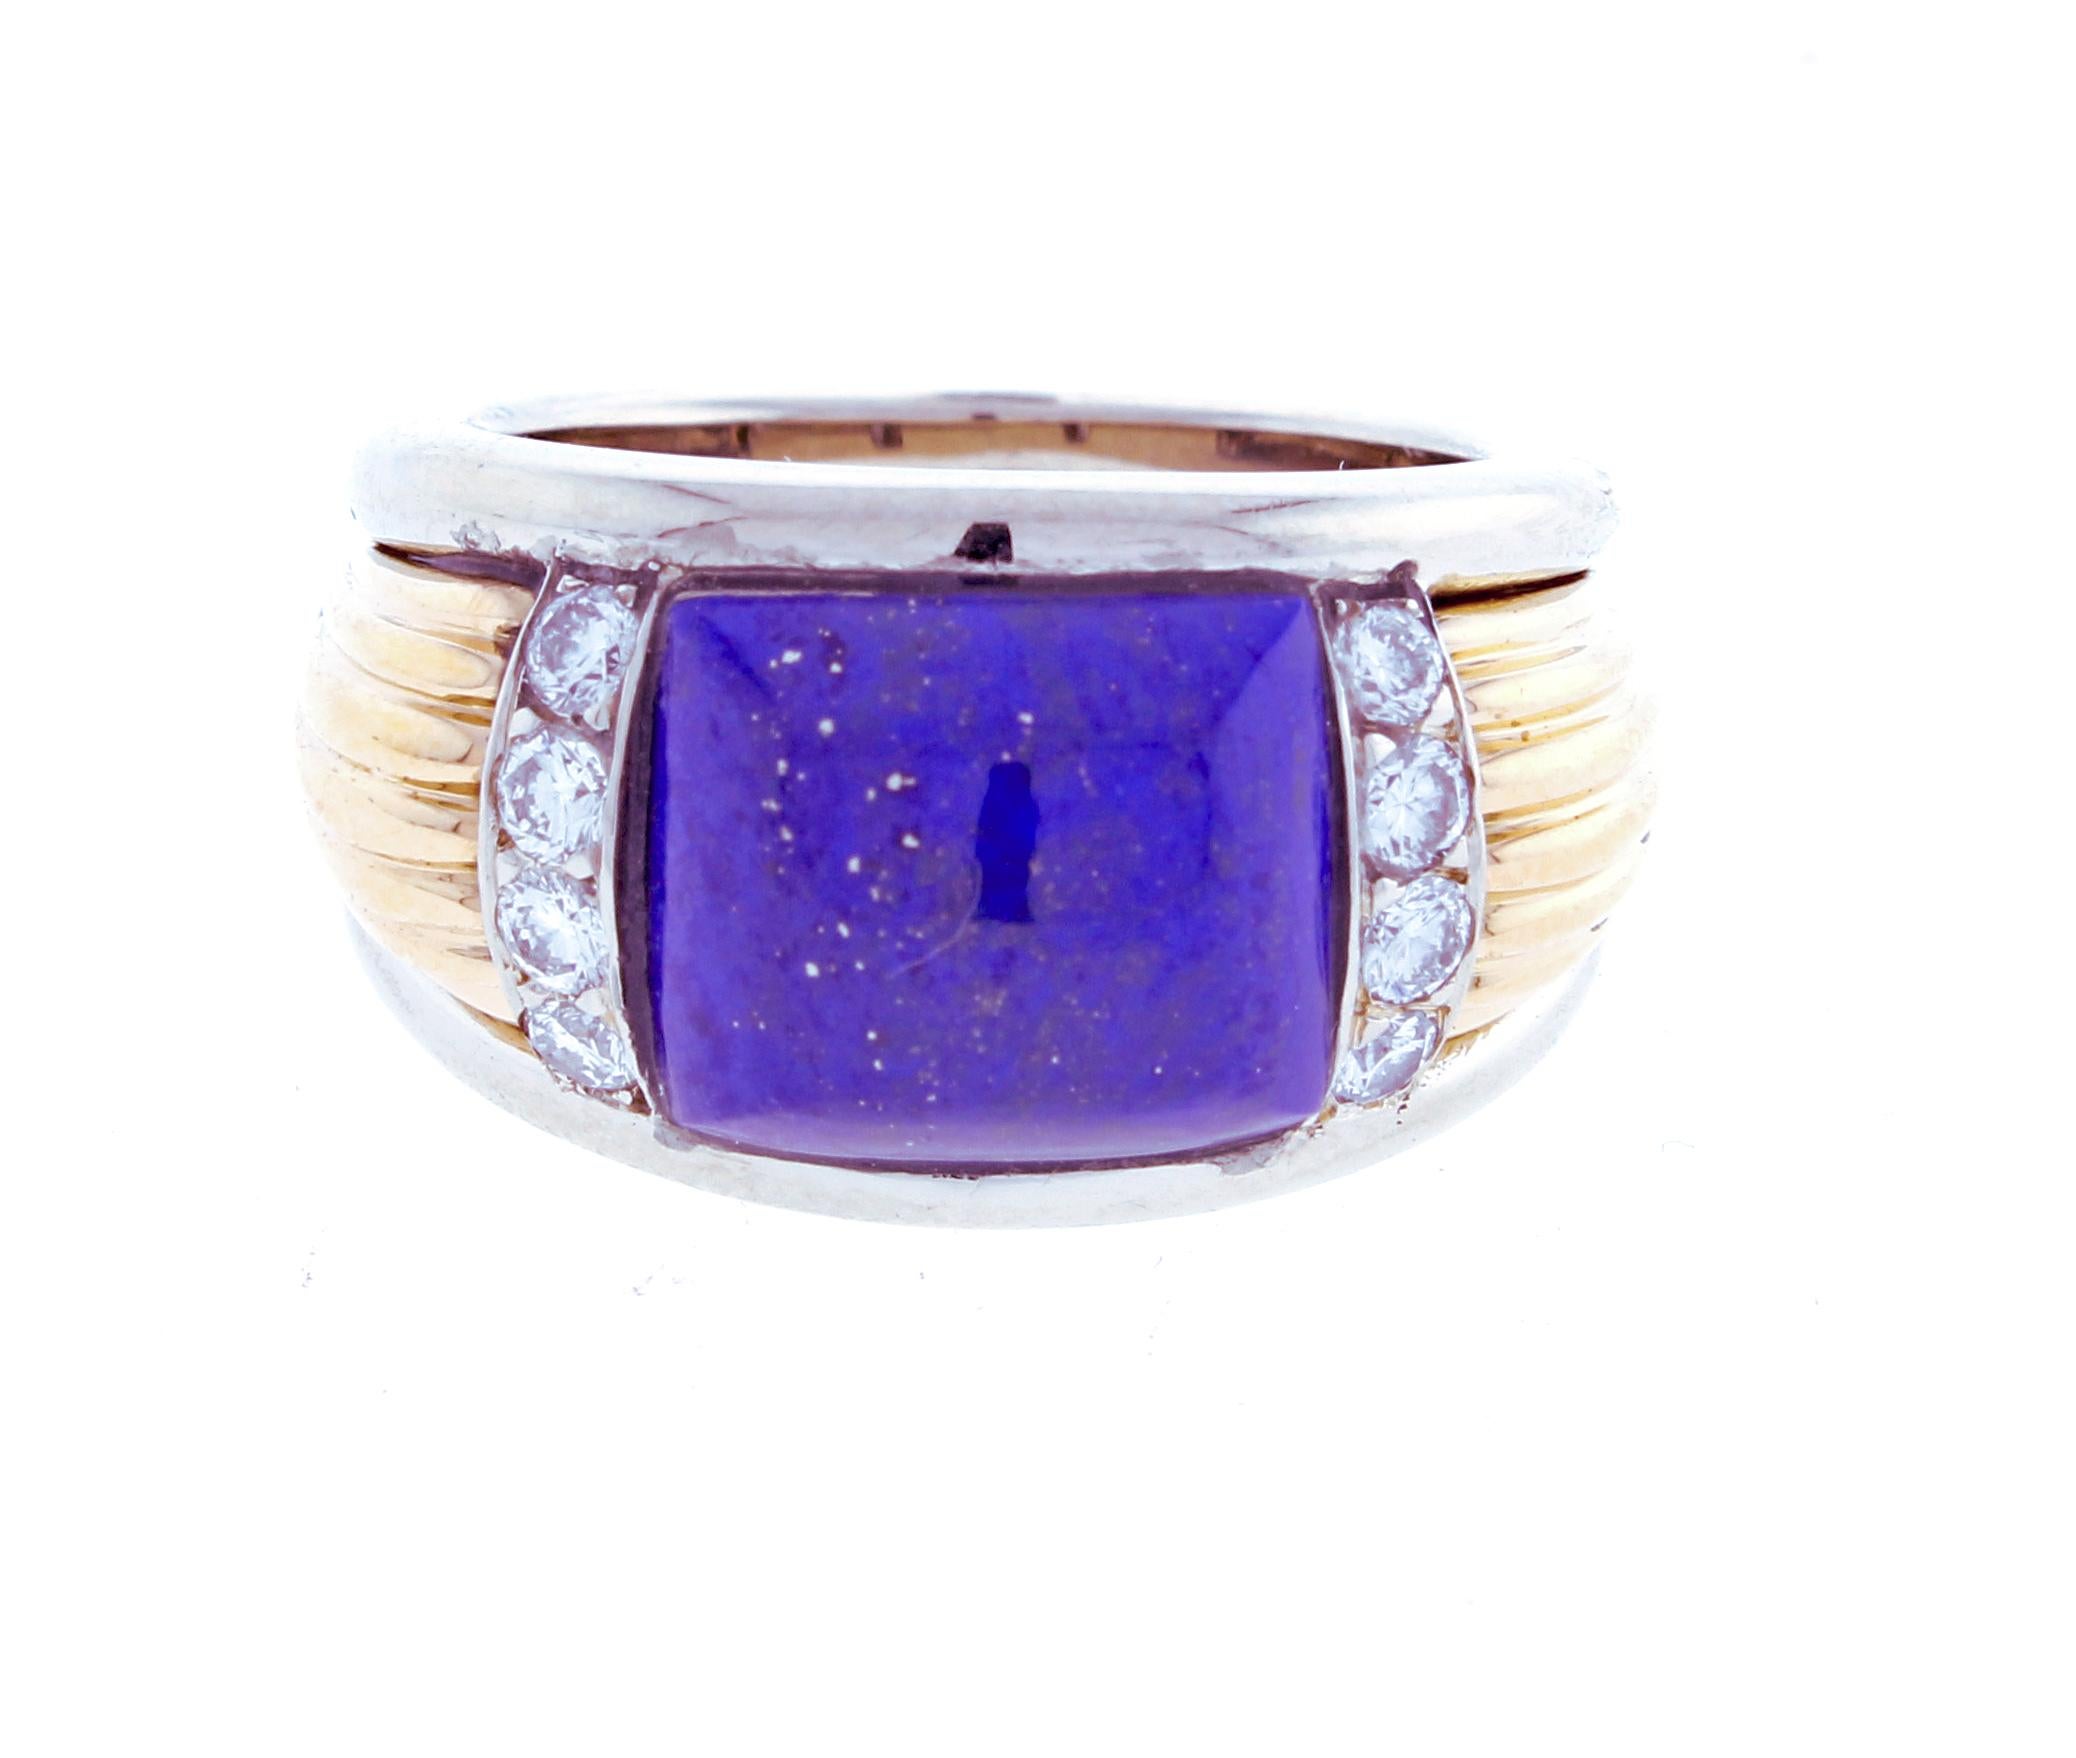  From Van Cleef & Arpels a  lapis and diamond  ring. The  white and yellow 18 karat gold features 8 diamonds weighing approximately  .16 carats. Lapis 9. x 10mm, overall ring width 12.5mm, size 6.  Signed Van Cleef & Arpels #B5486  French quality